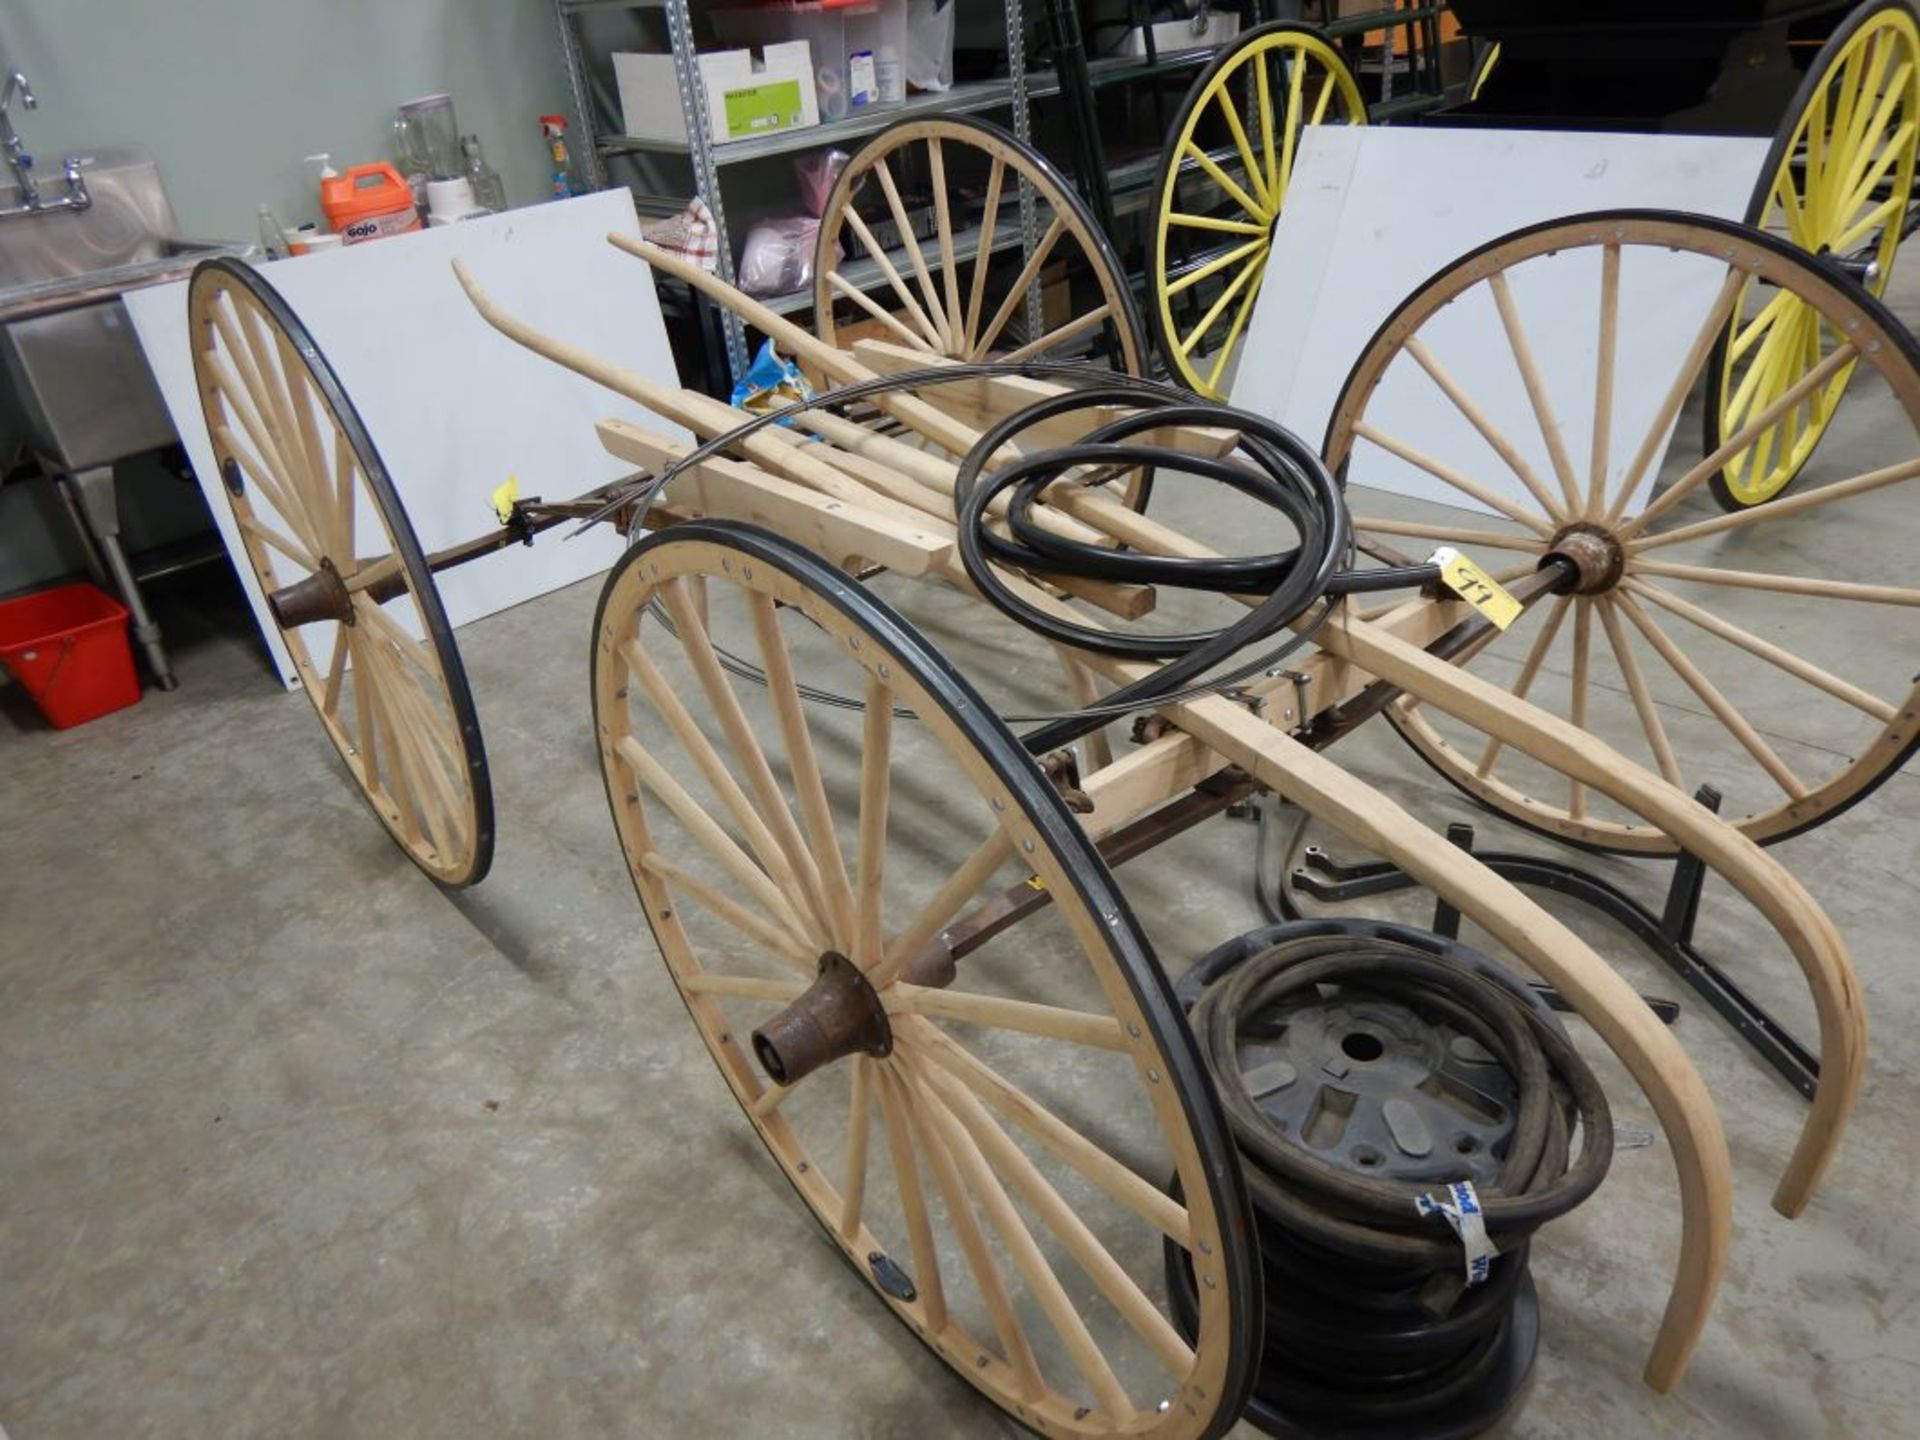 BUGGY FRAME & WHEELS W/RUBBER TIRE MATERIAL, INCOMPLETE RESTORATION BY JIM TRONNES - Image 2 of 3